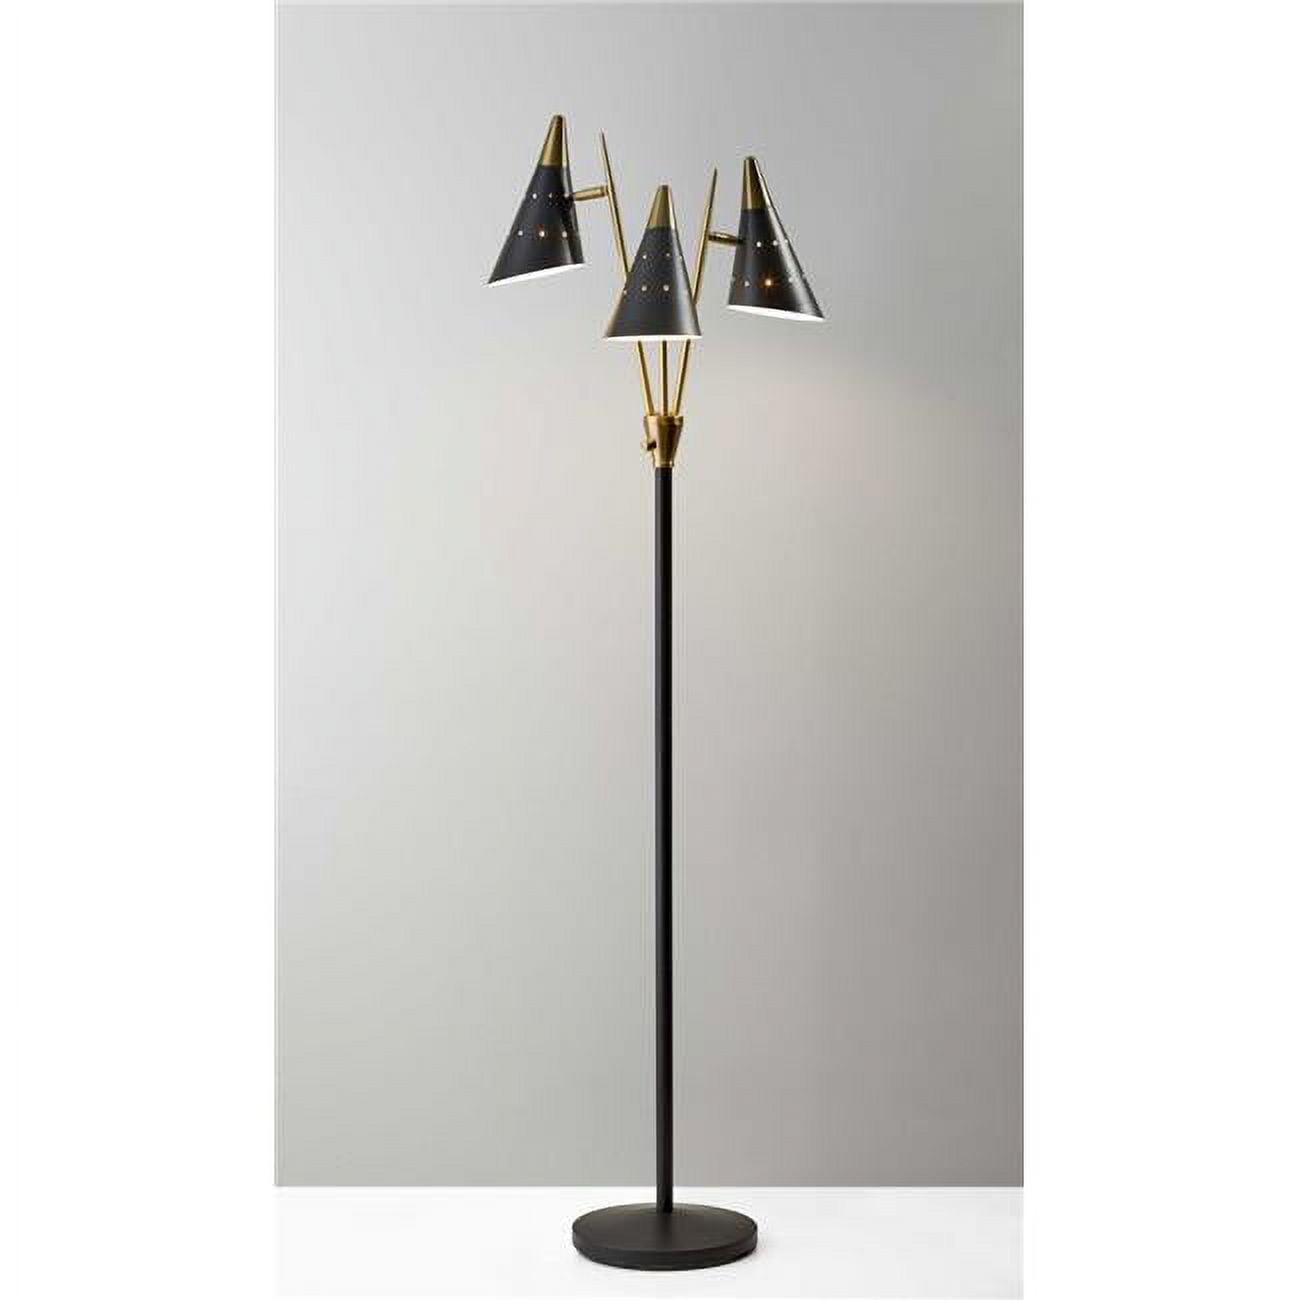 Mid-Century Modern Black Metal Floor Lamp with Antique Brass Accents